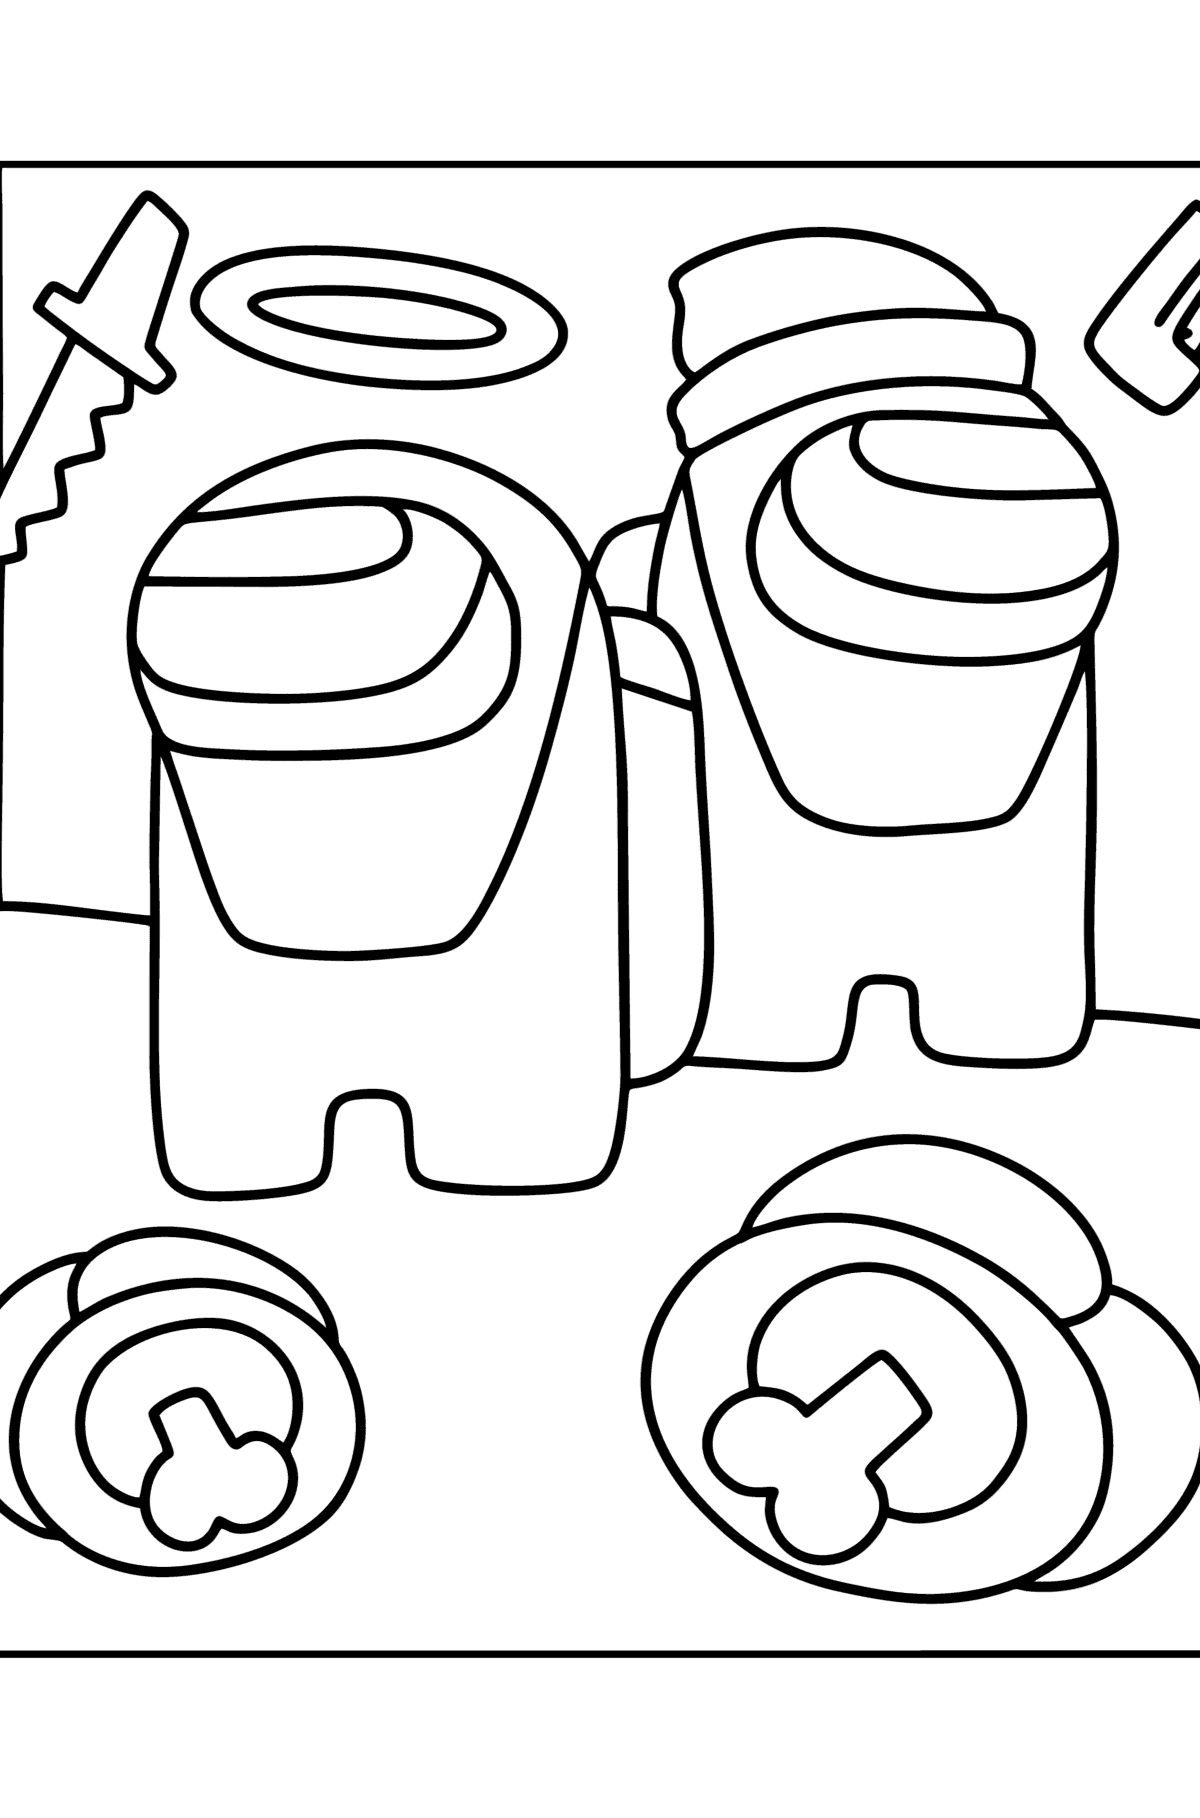 Coloring page Among Us Pursuit - Coloring Pages for Kids